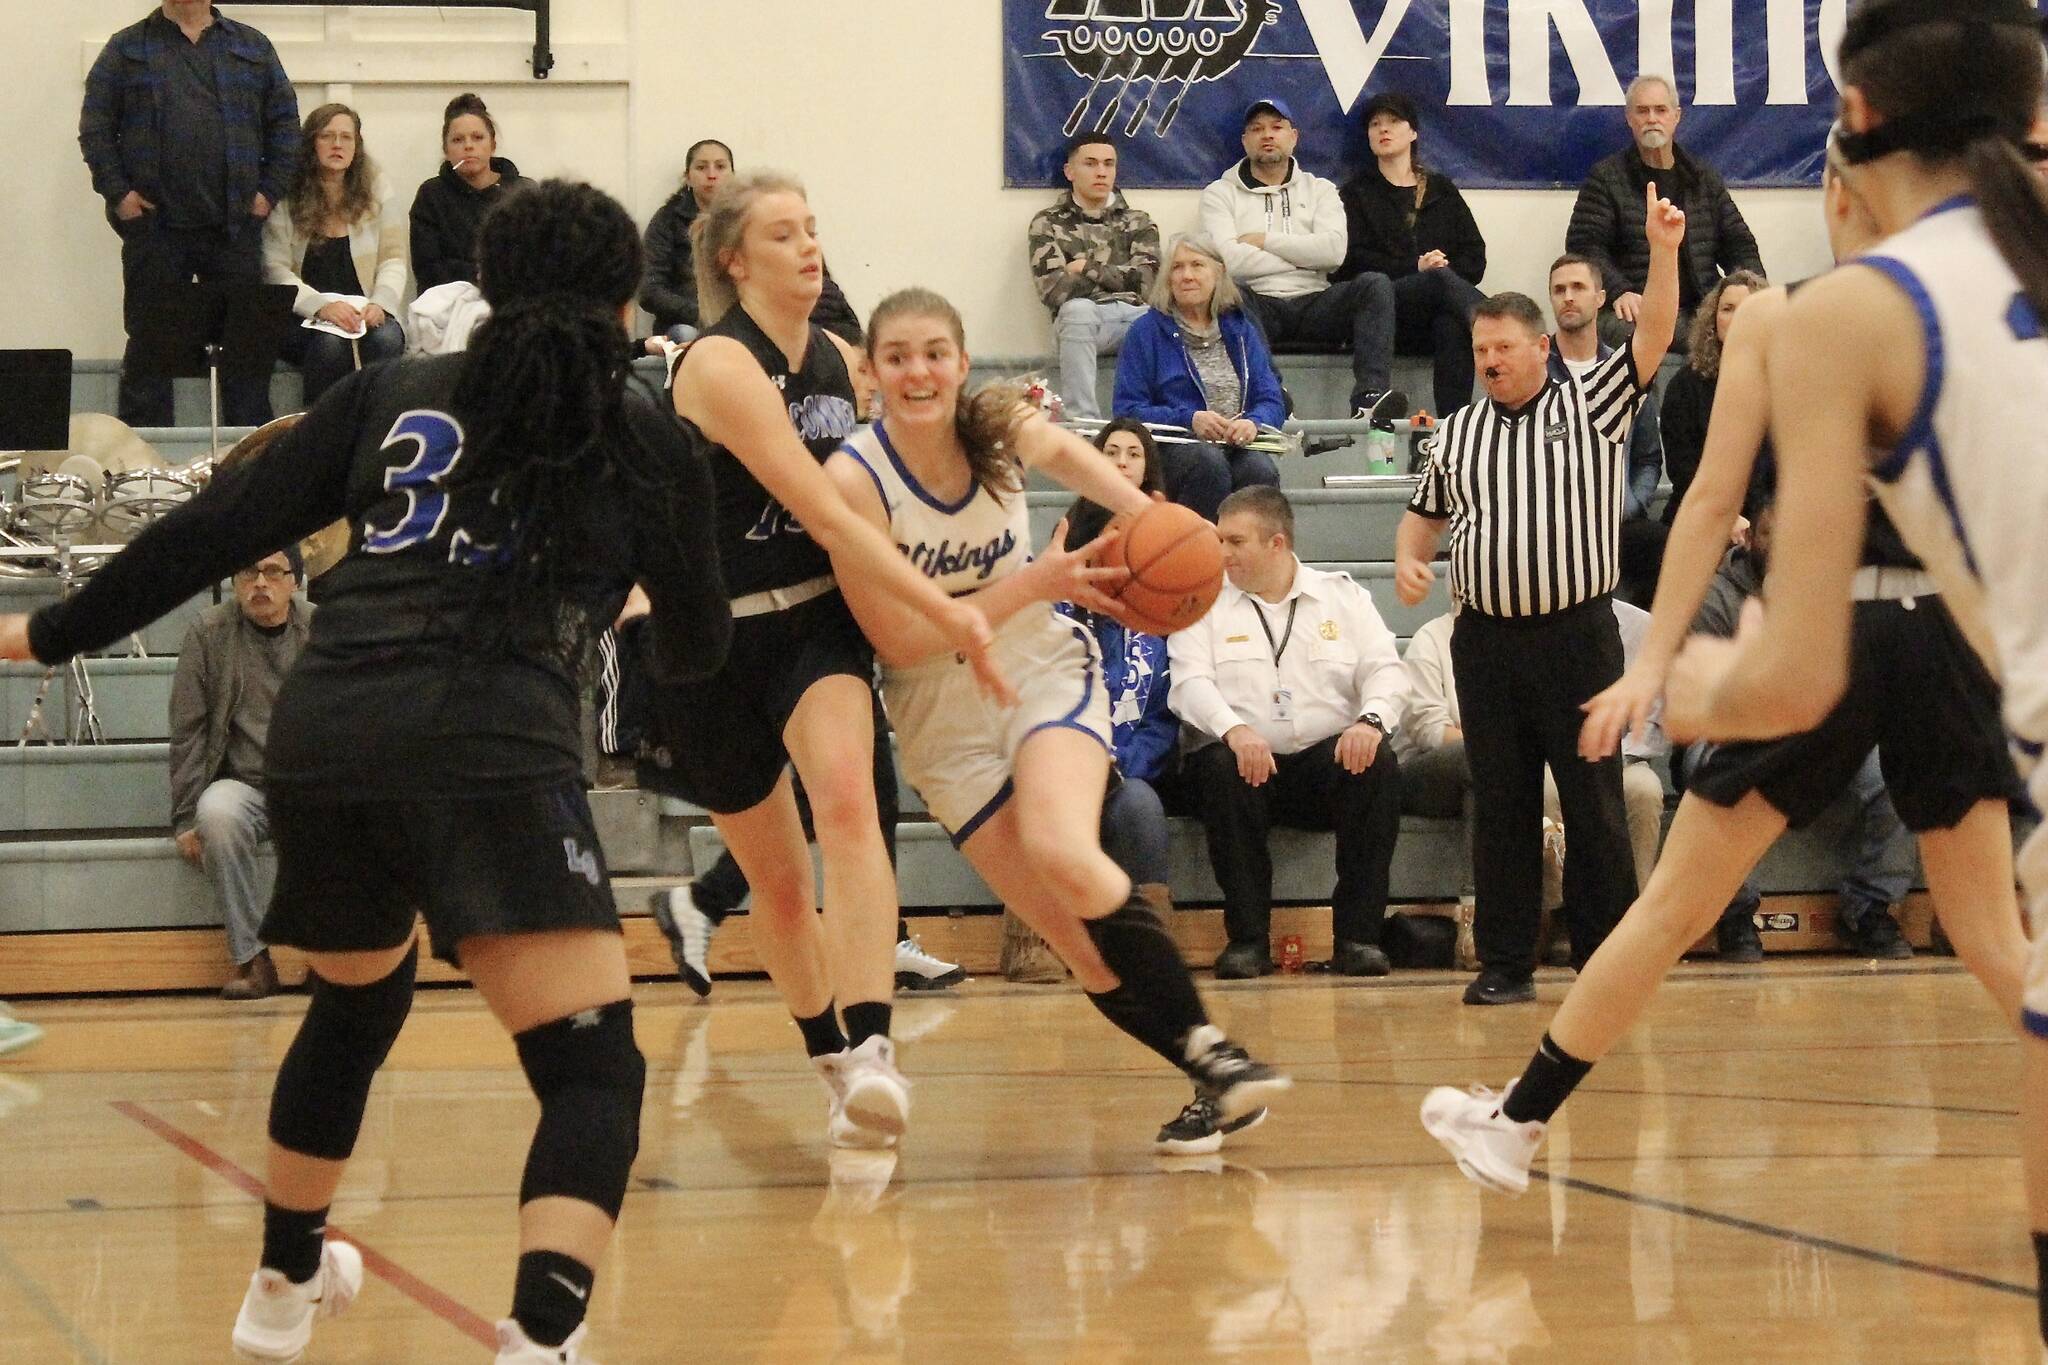 Corey Wiscomb photo.
Bethany Carter dips the shoulder below a La Conner defender on a drive to the hoop.